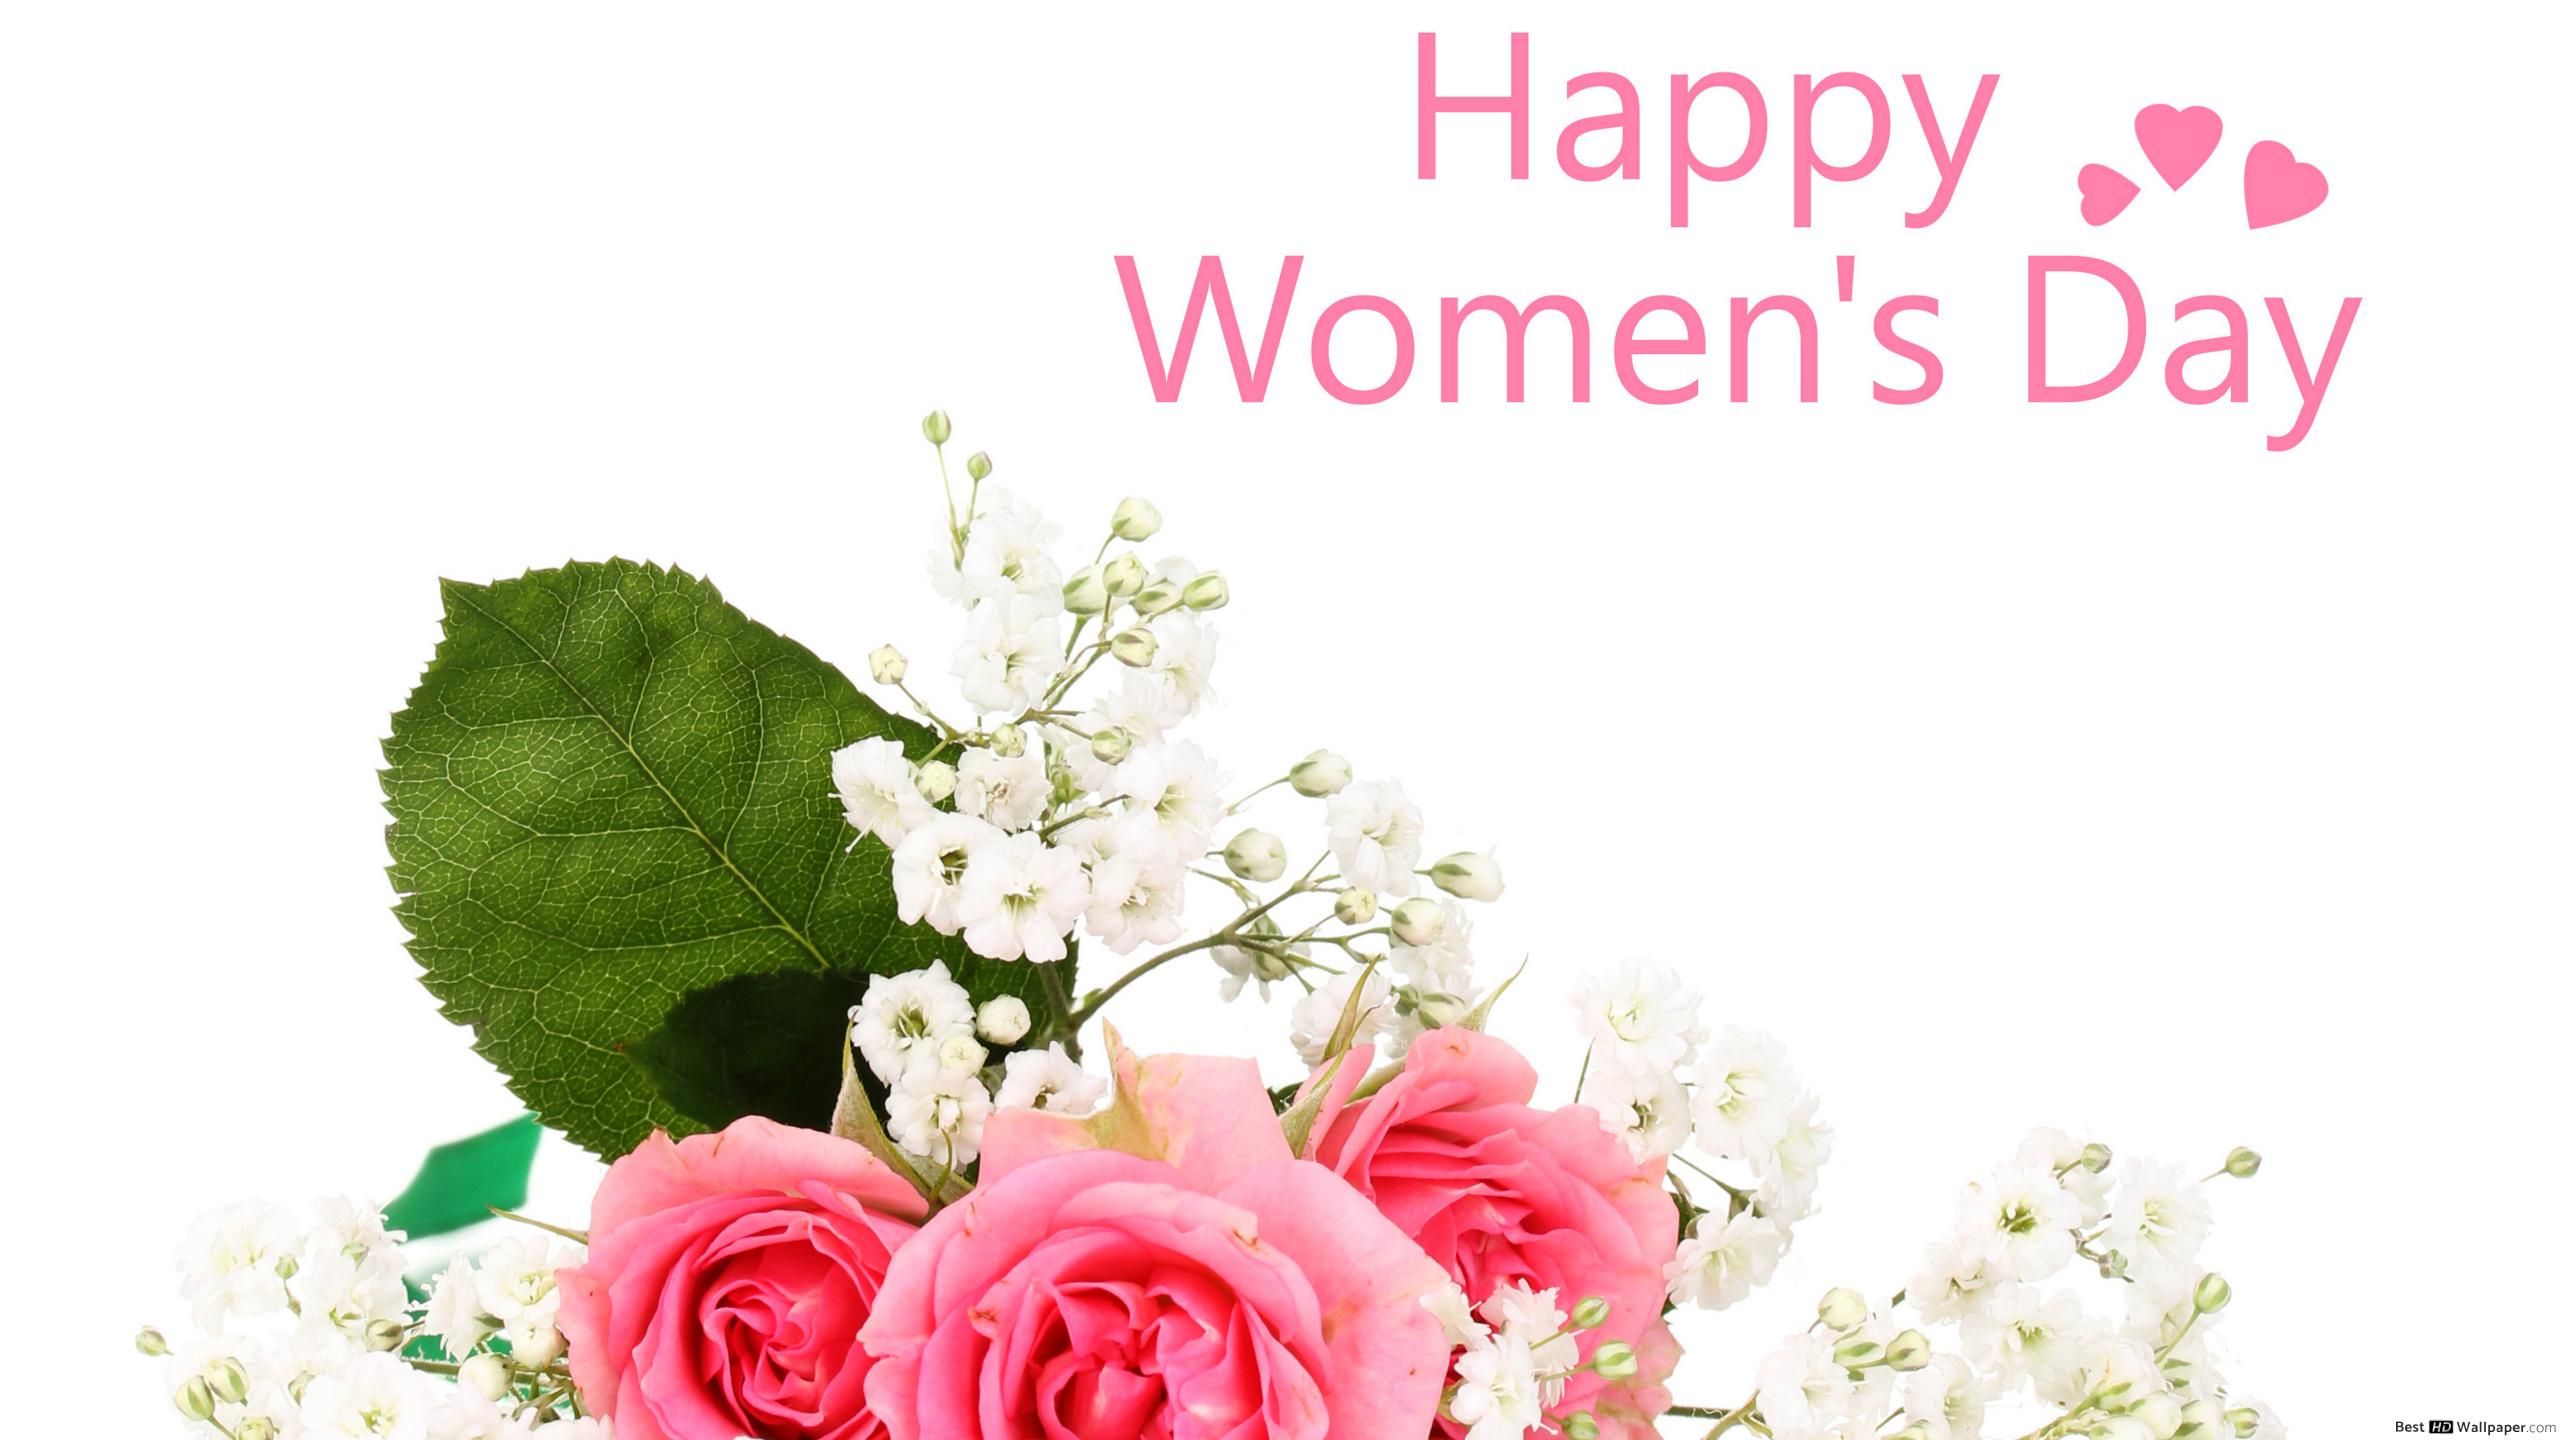 Women's Day pink roses HD wallpaper download